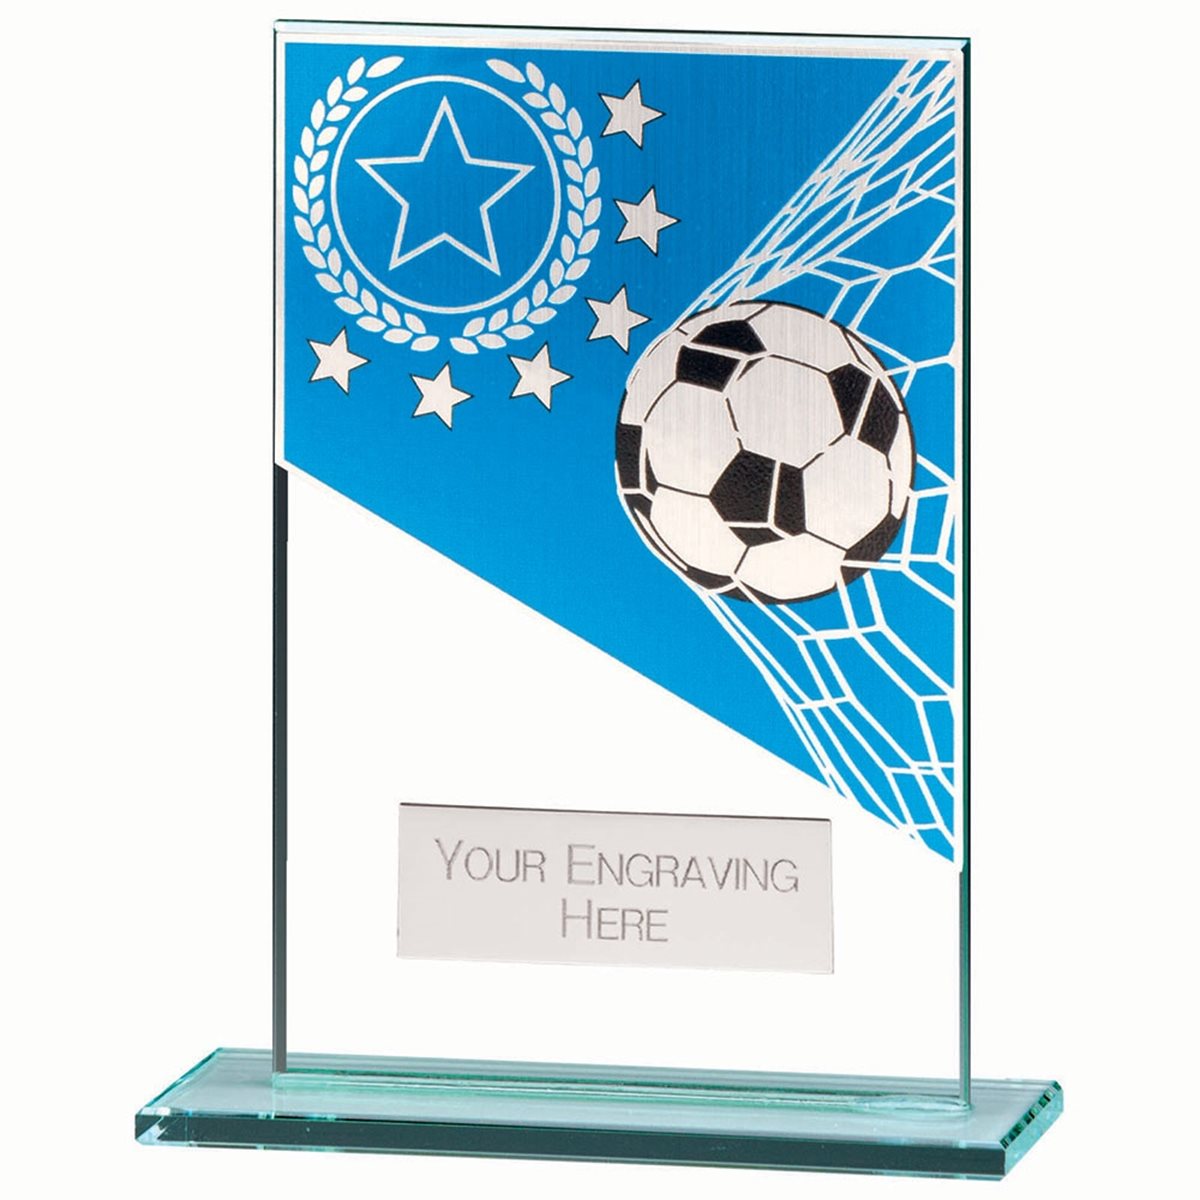 Mustang Blue & Silver Glass Football Award CR22289 (5mm thick)